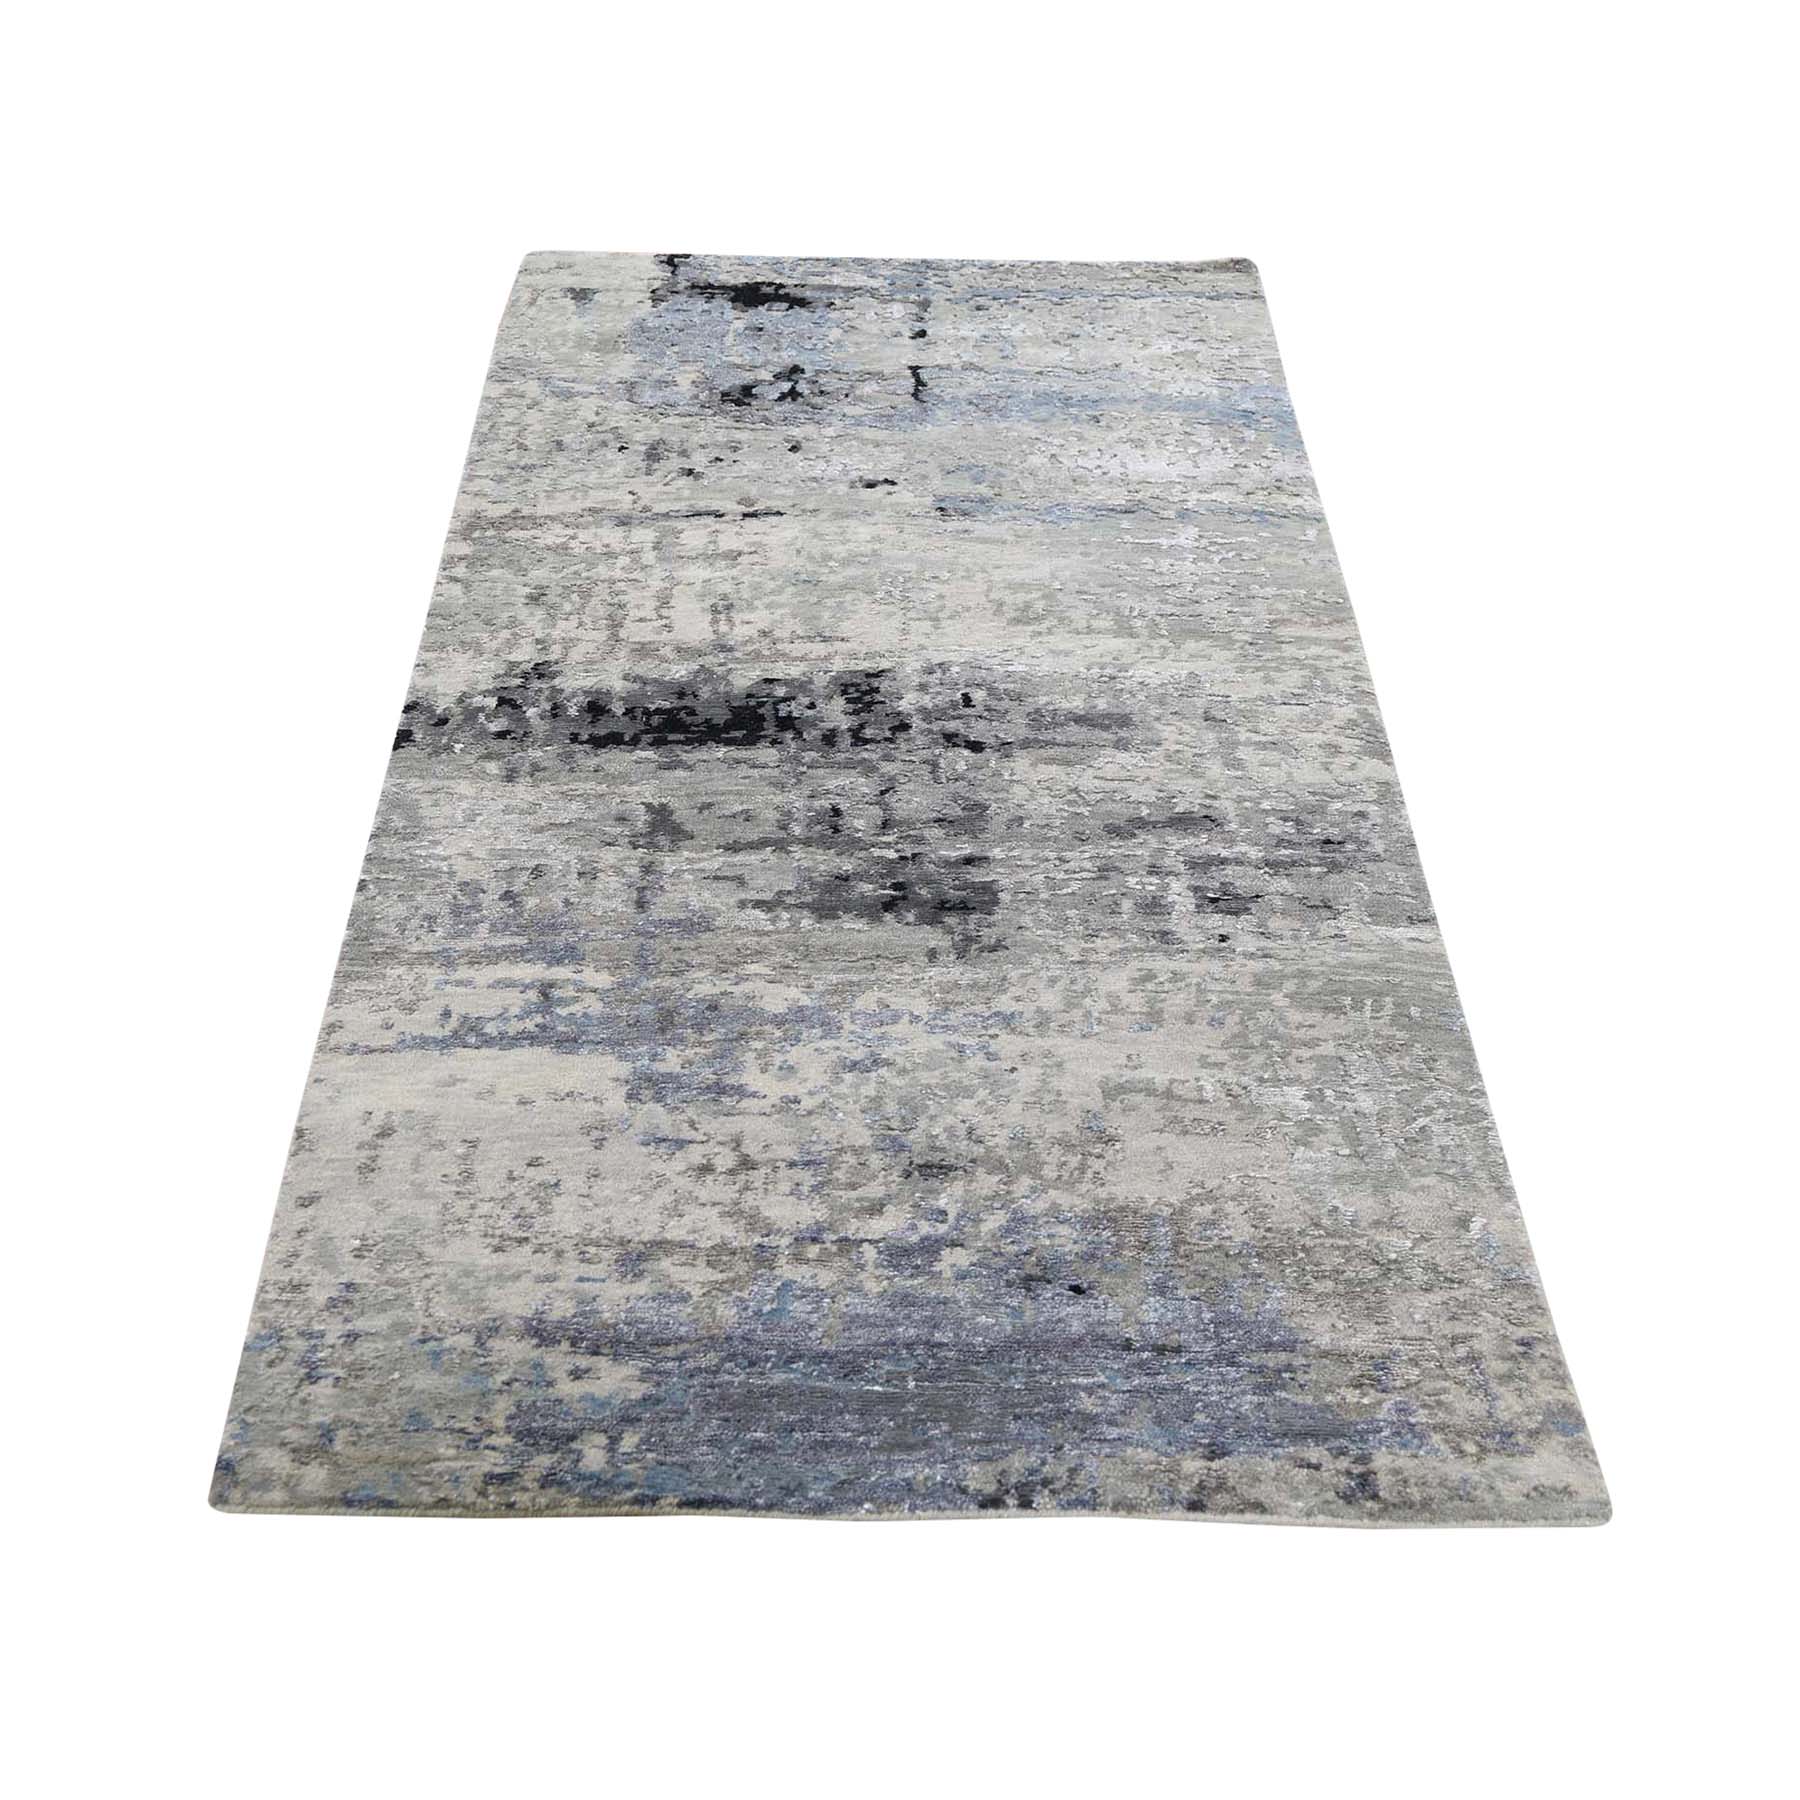 2-7 x5-9  Gray Hi low Pile Abstract Design Runner Wool And Silk Hand-Knotted Oriental Rug 